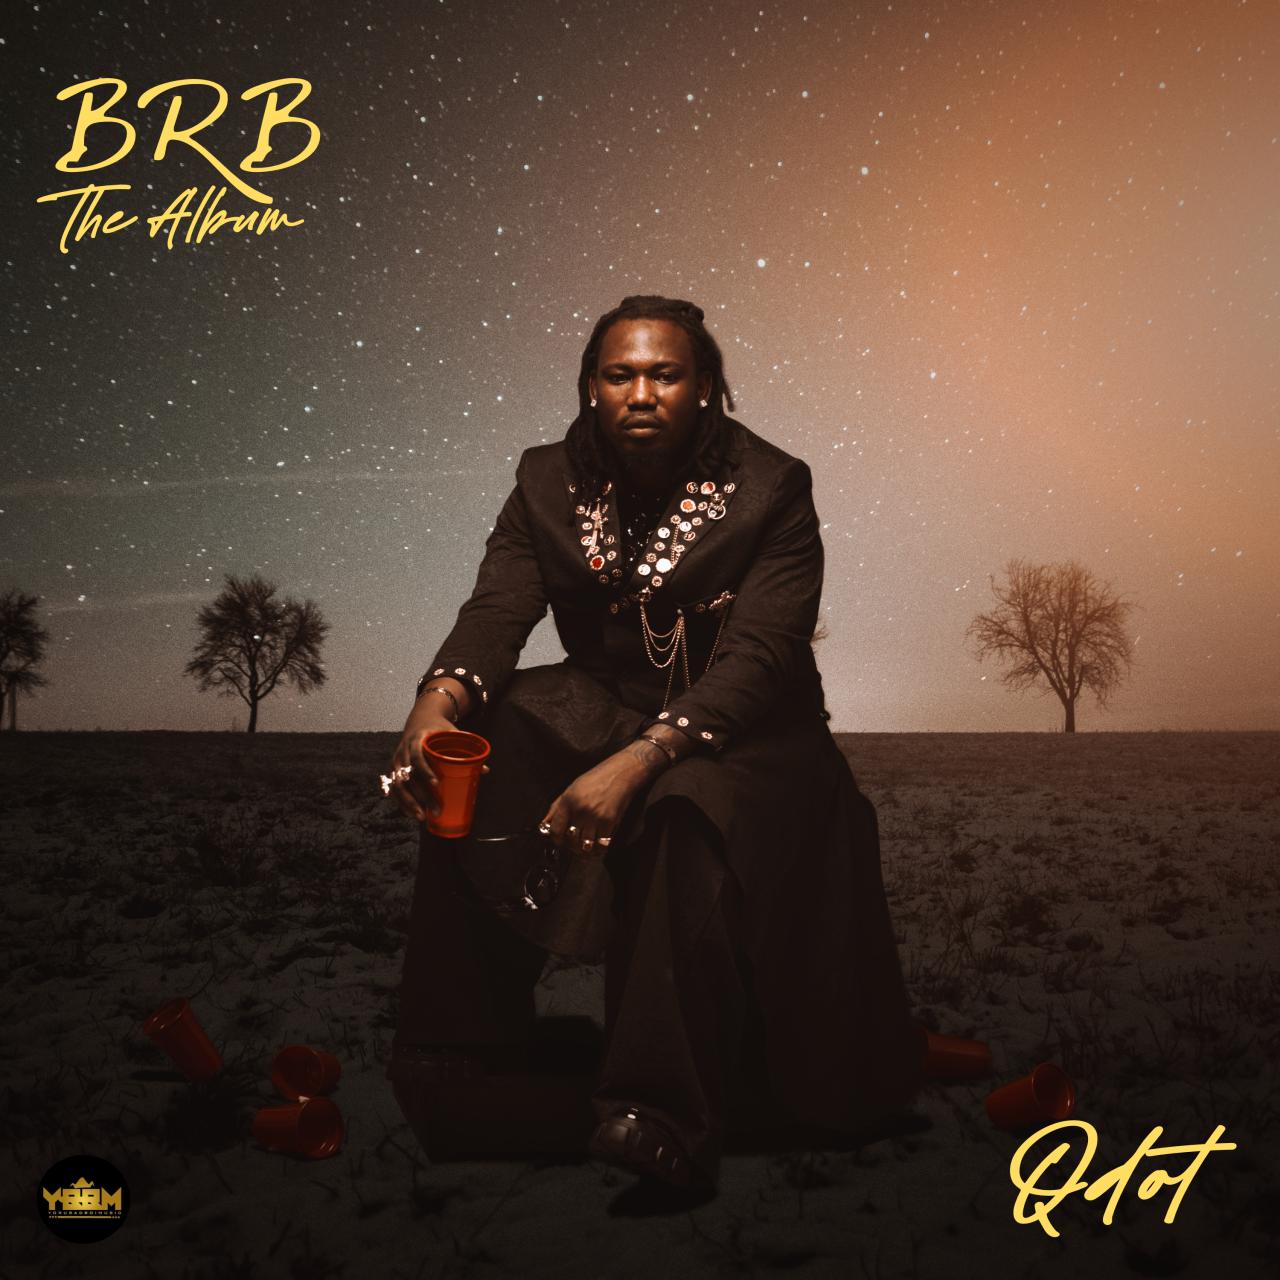 Read All The Lyrics To Qdot’s New Album ‘BRB (Be Right Back)’